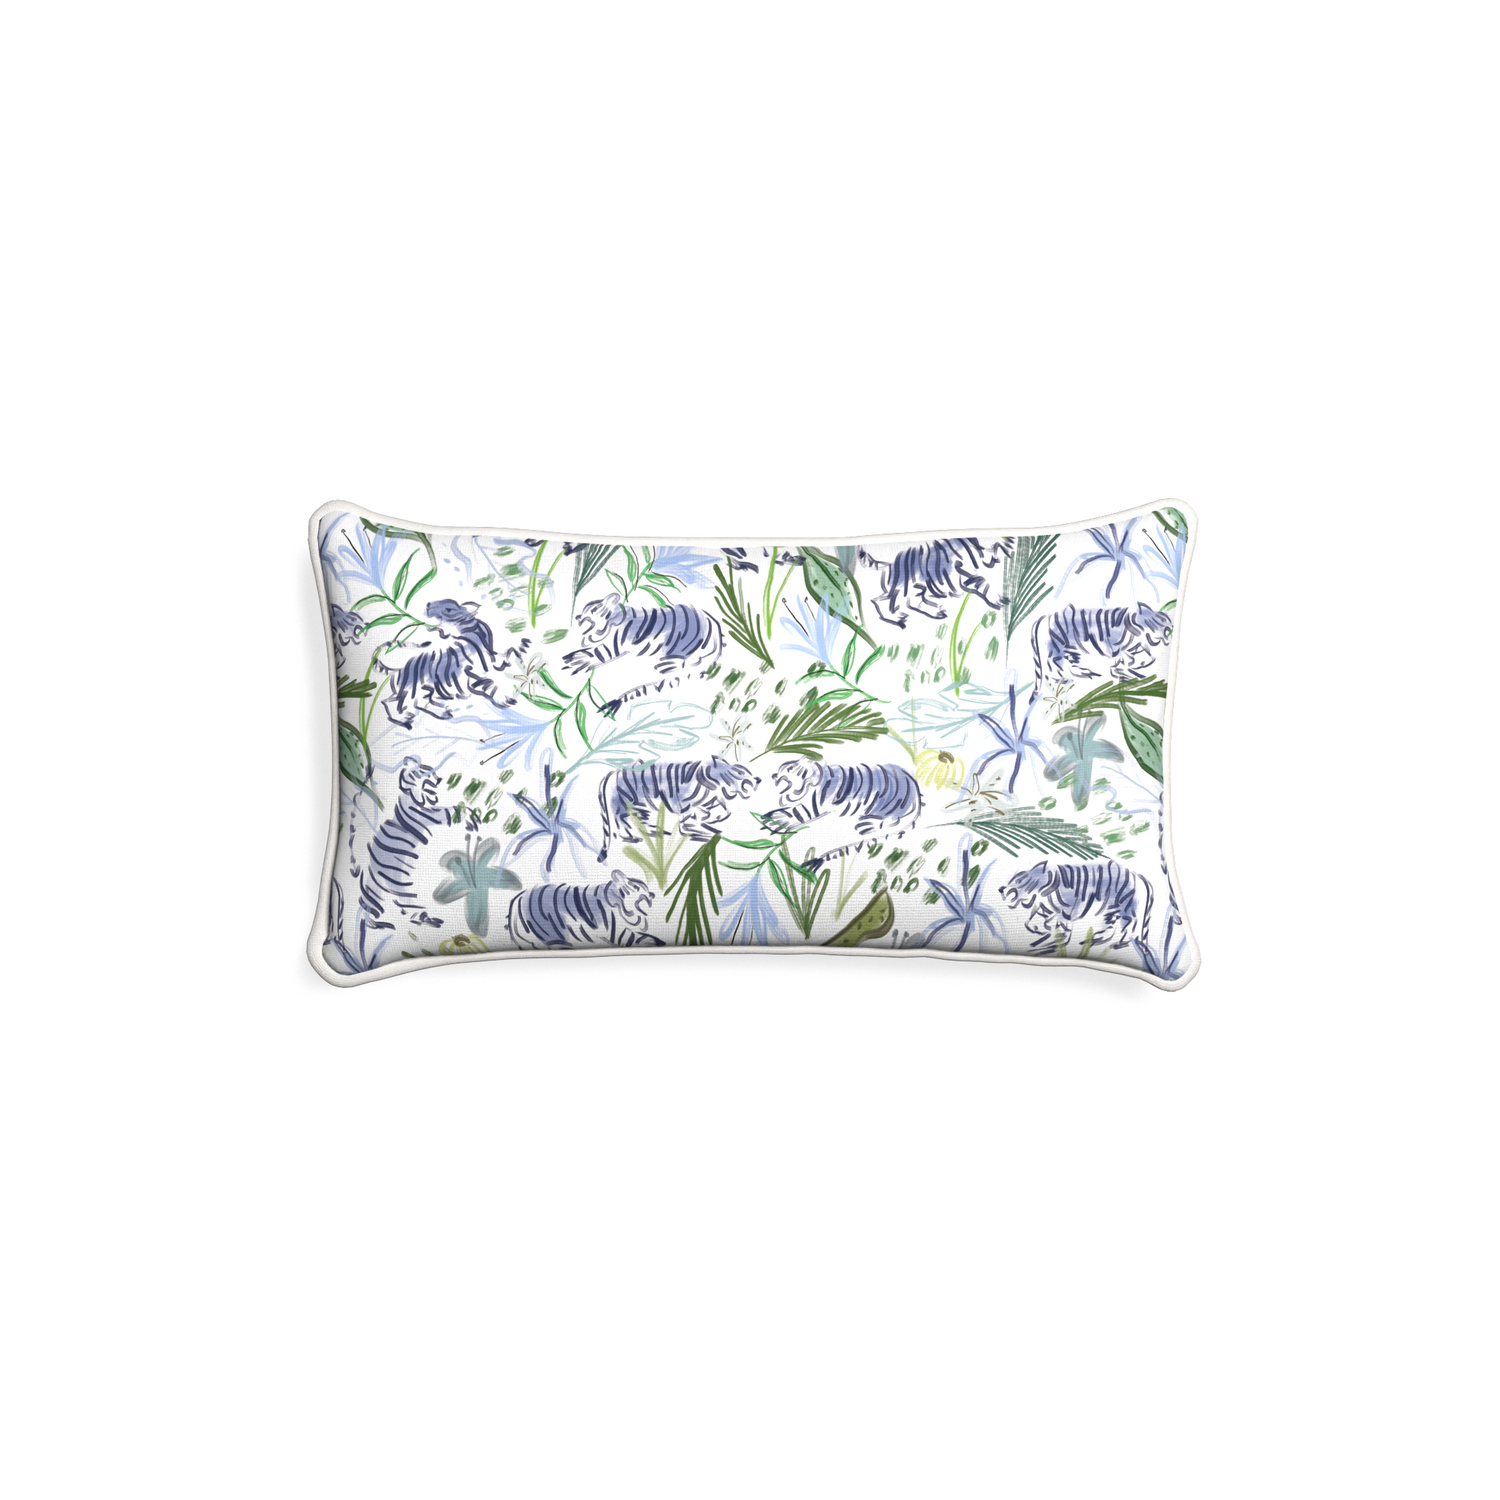 Petite-lumbar frida green custom green tigerpillow with snow piping on white background